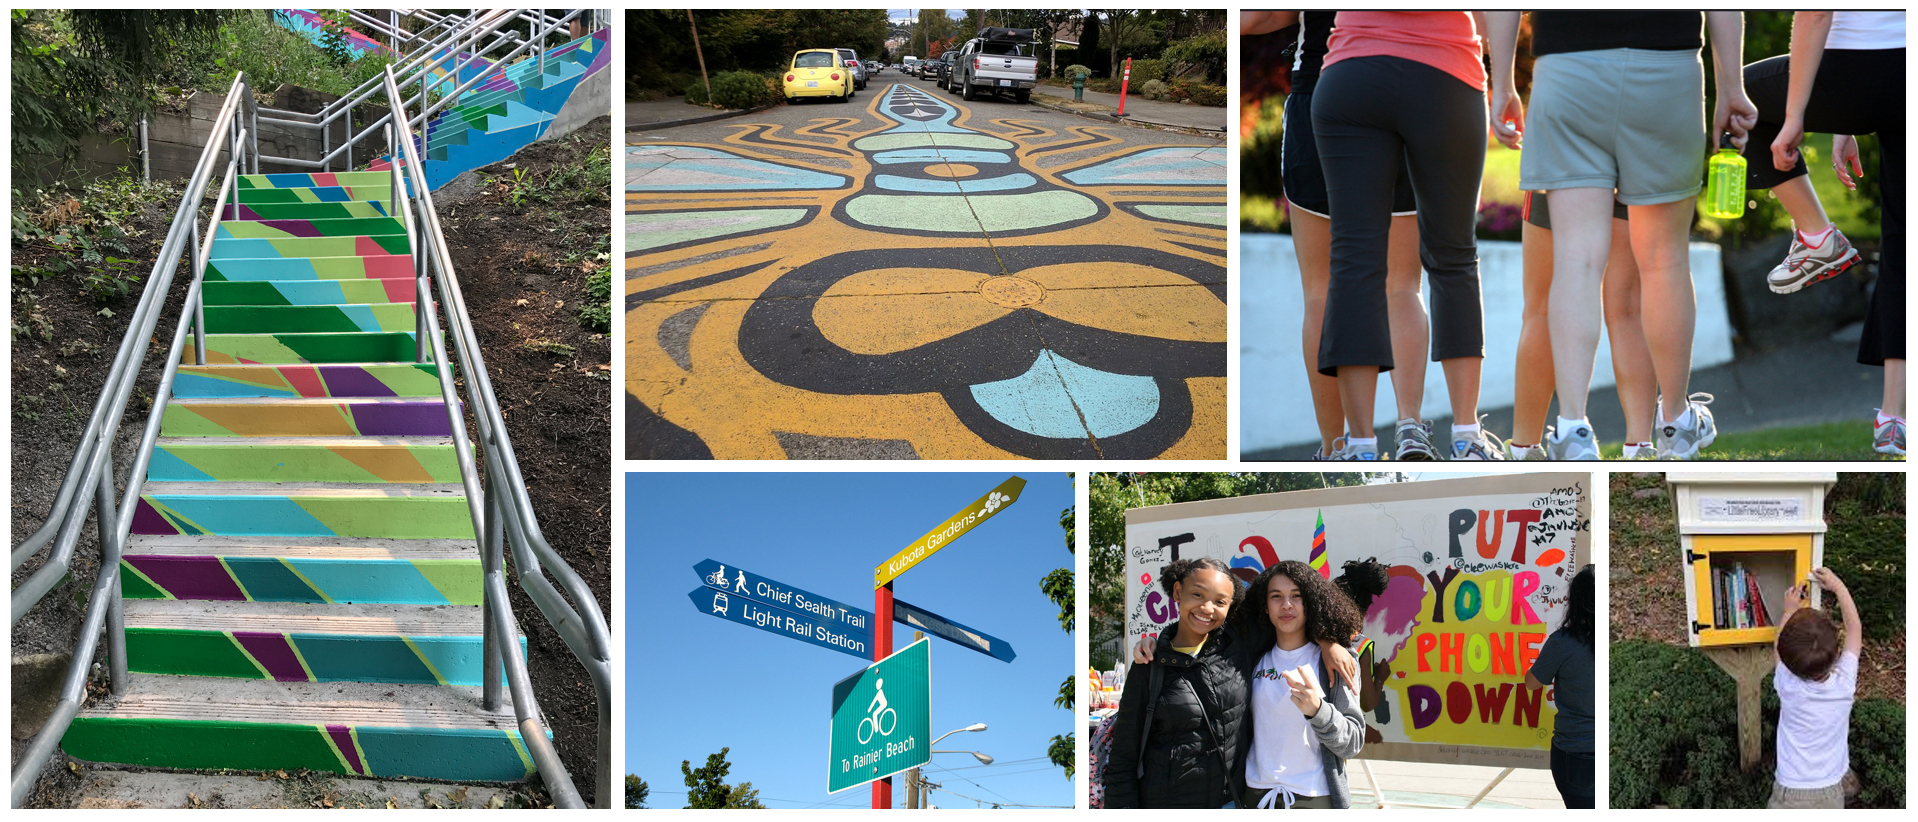 Examples of placemaking around Seattle